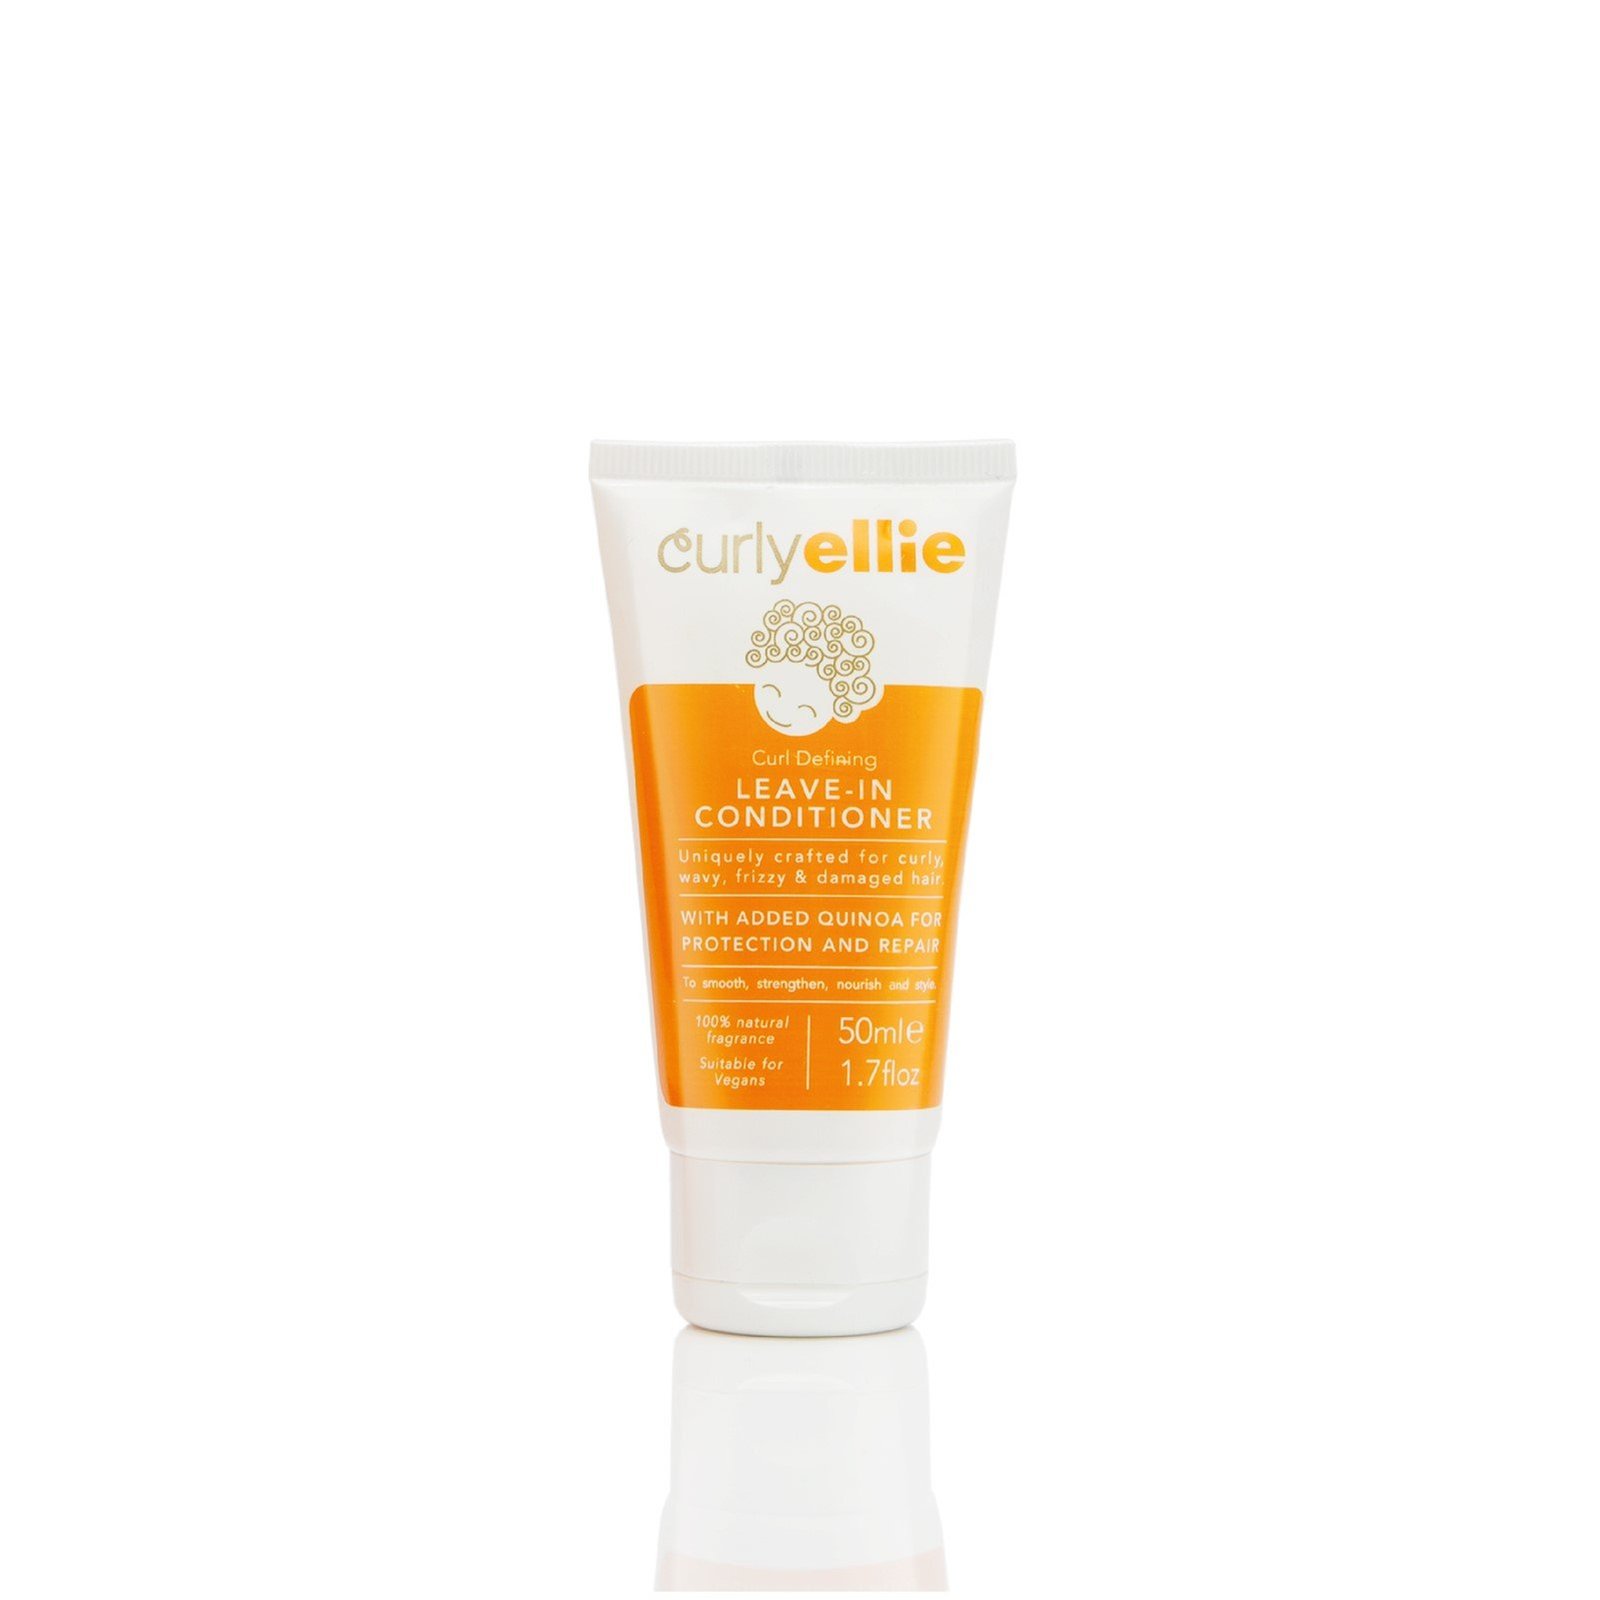 CurlyEllie Curl Defining Leave-in Conditioner 50ml